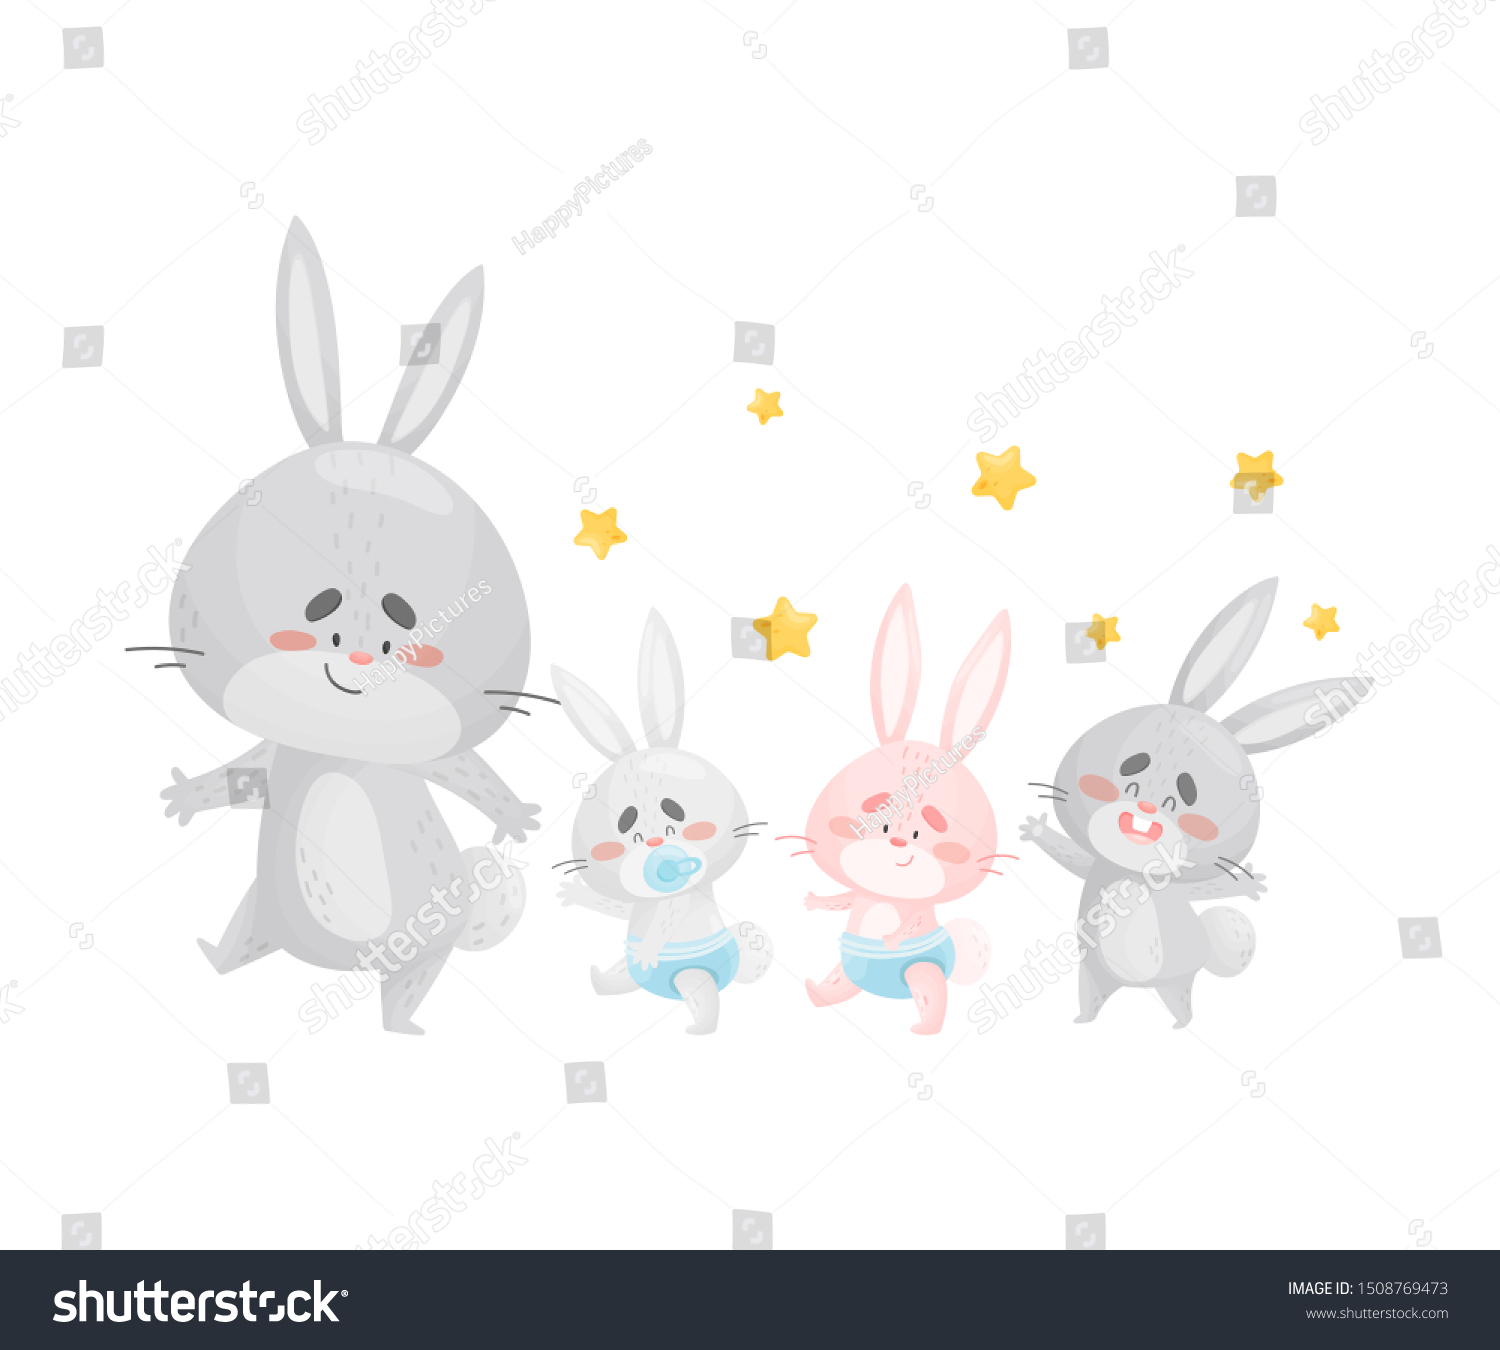 SVG of Dad the rabbit comes with little rabbits. Vector illustration on a white background. svg